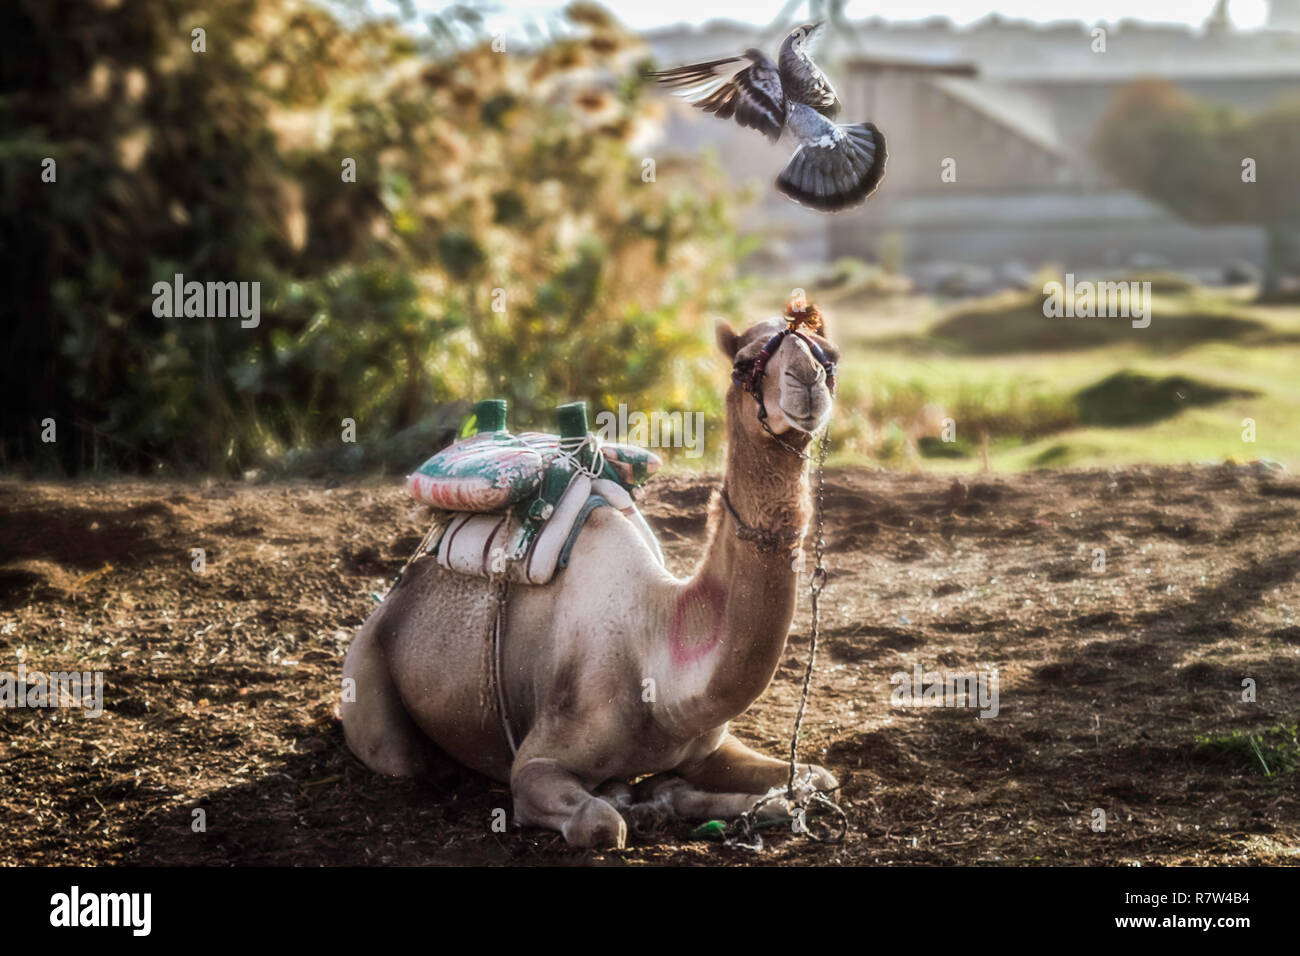 Flying Pigeon playing with setting camel in the early morning ,captured in camels farm located in Aswan Egypt Stock Photo